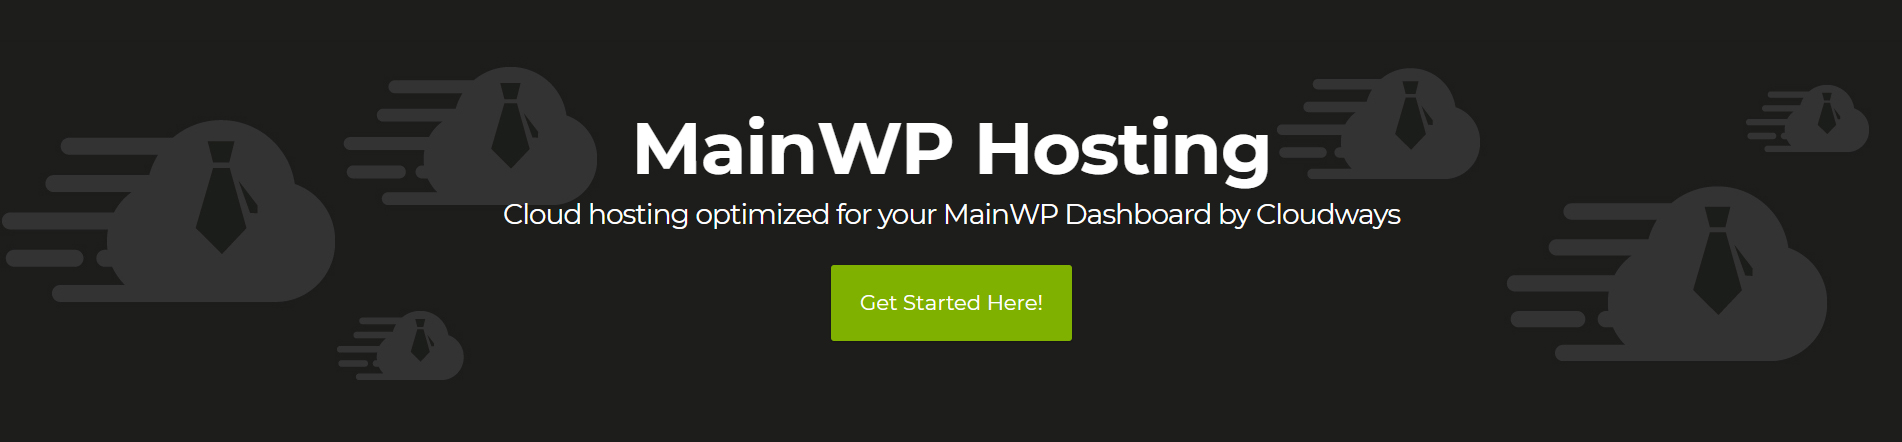 How to Install MainWP Dashboard App on Cloudways Hosting 1